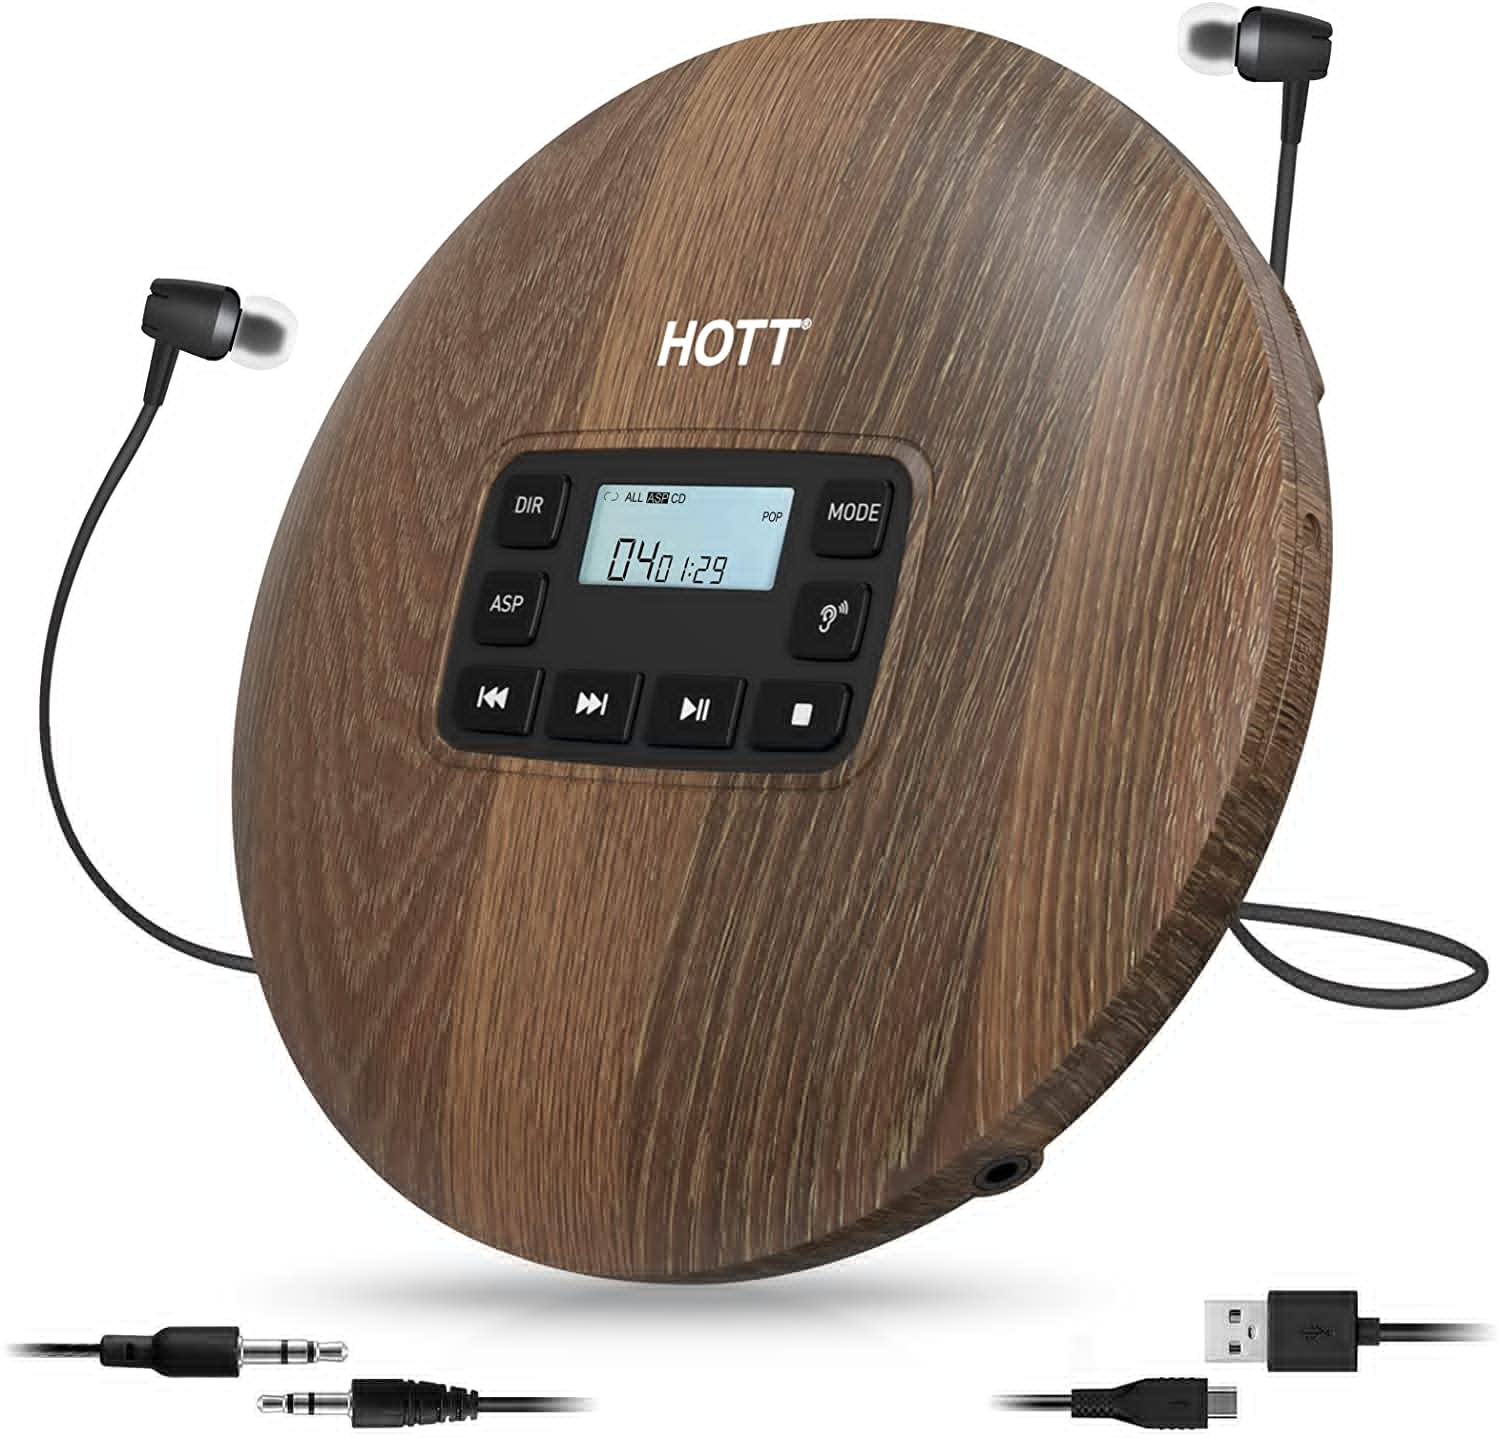 HOTT Portable CD Player CD611 Small Walkman CD Player with Stereo Headphones USB Cable LED Display Anti-Skip Anti-Shock Personal Compact Disc Music Player Wood - image 1 of 6